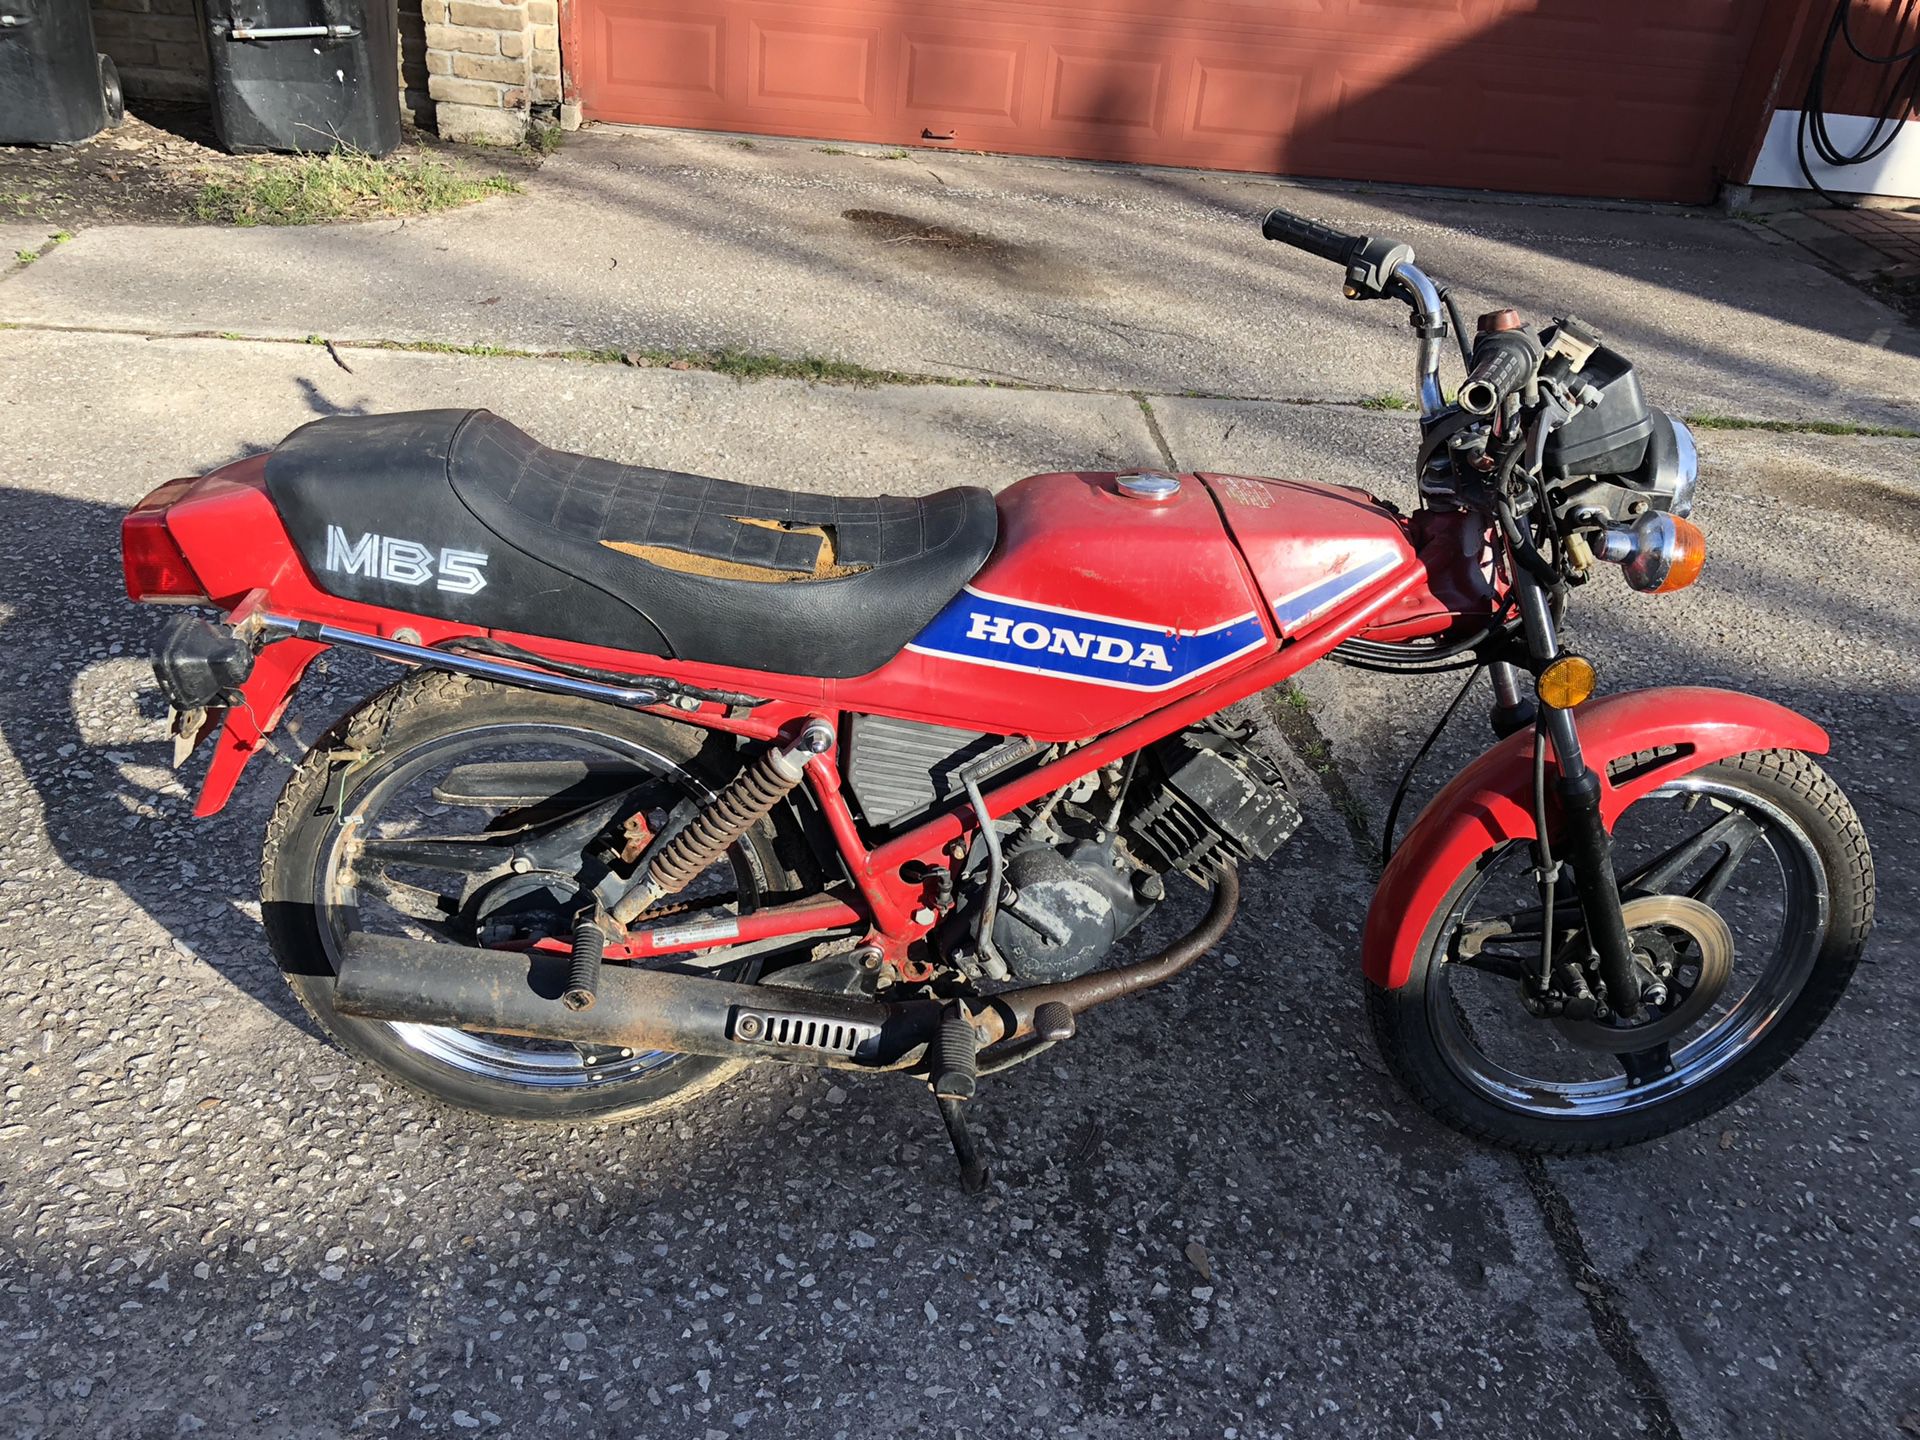 1980 Honda Mb5 50cc for Sale in TX - OfferUp